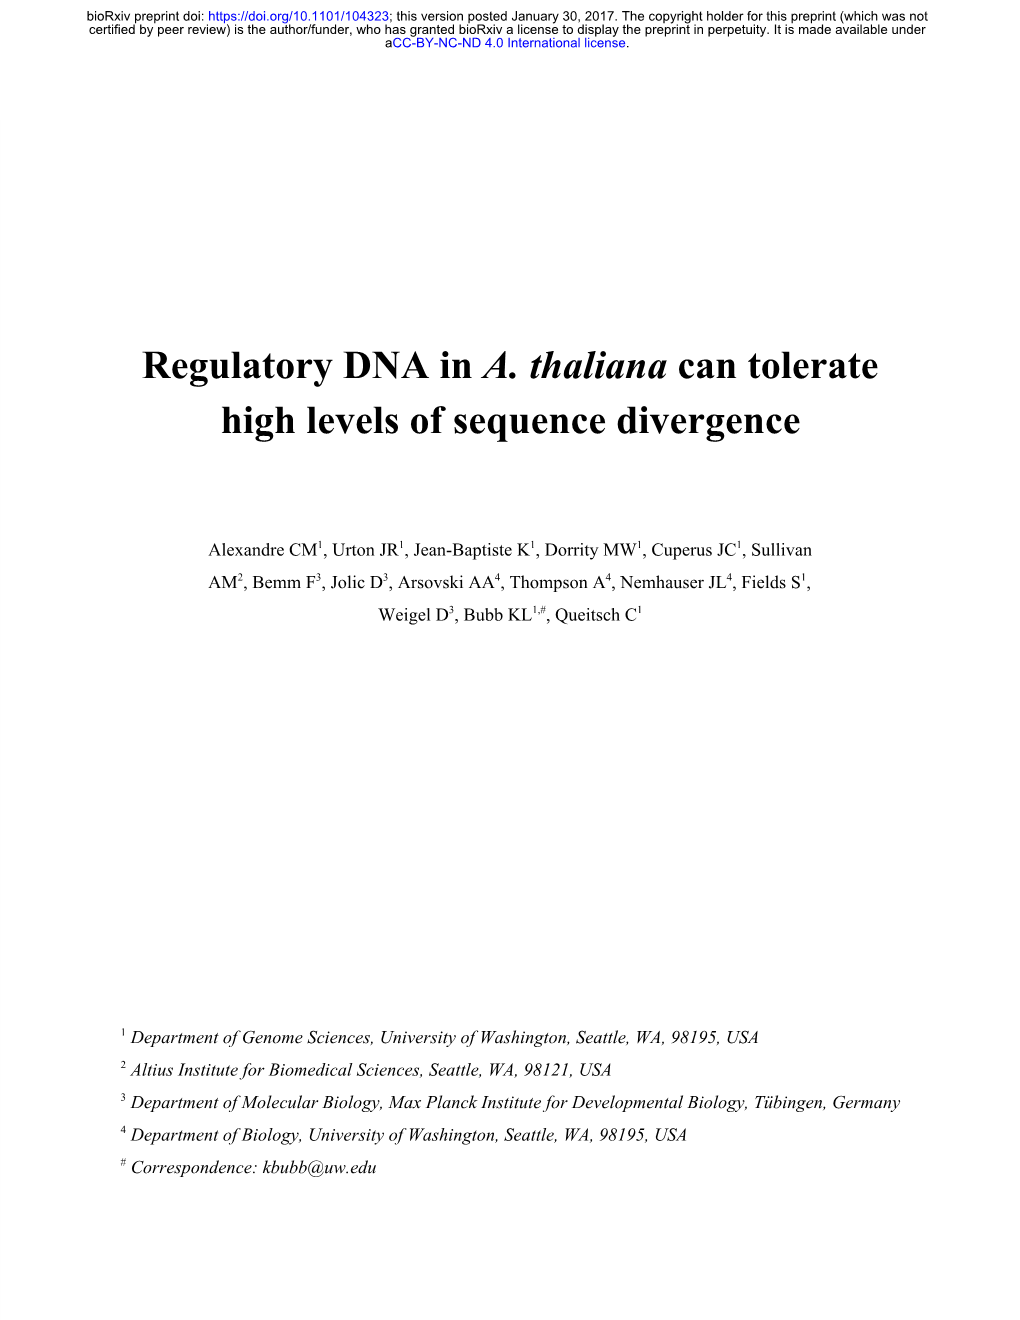 Regulatory DNA in A. Thaliana Can Tolerate High Levels of Sequence